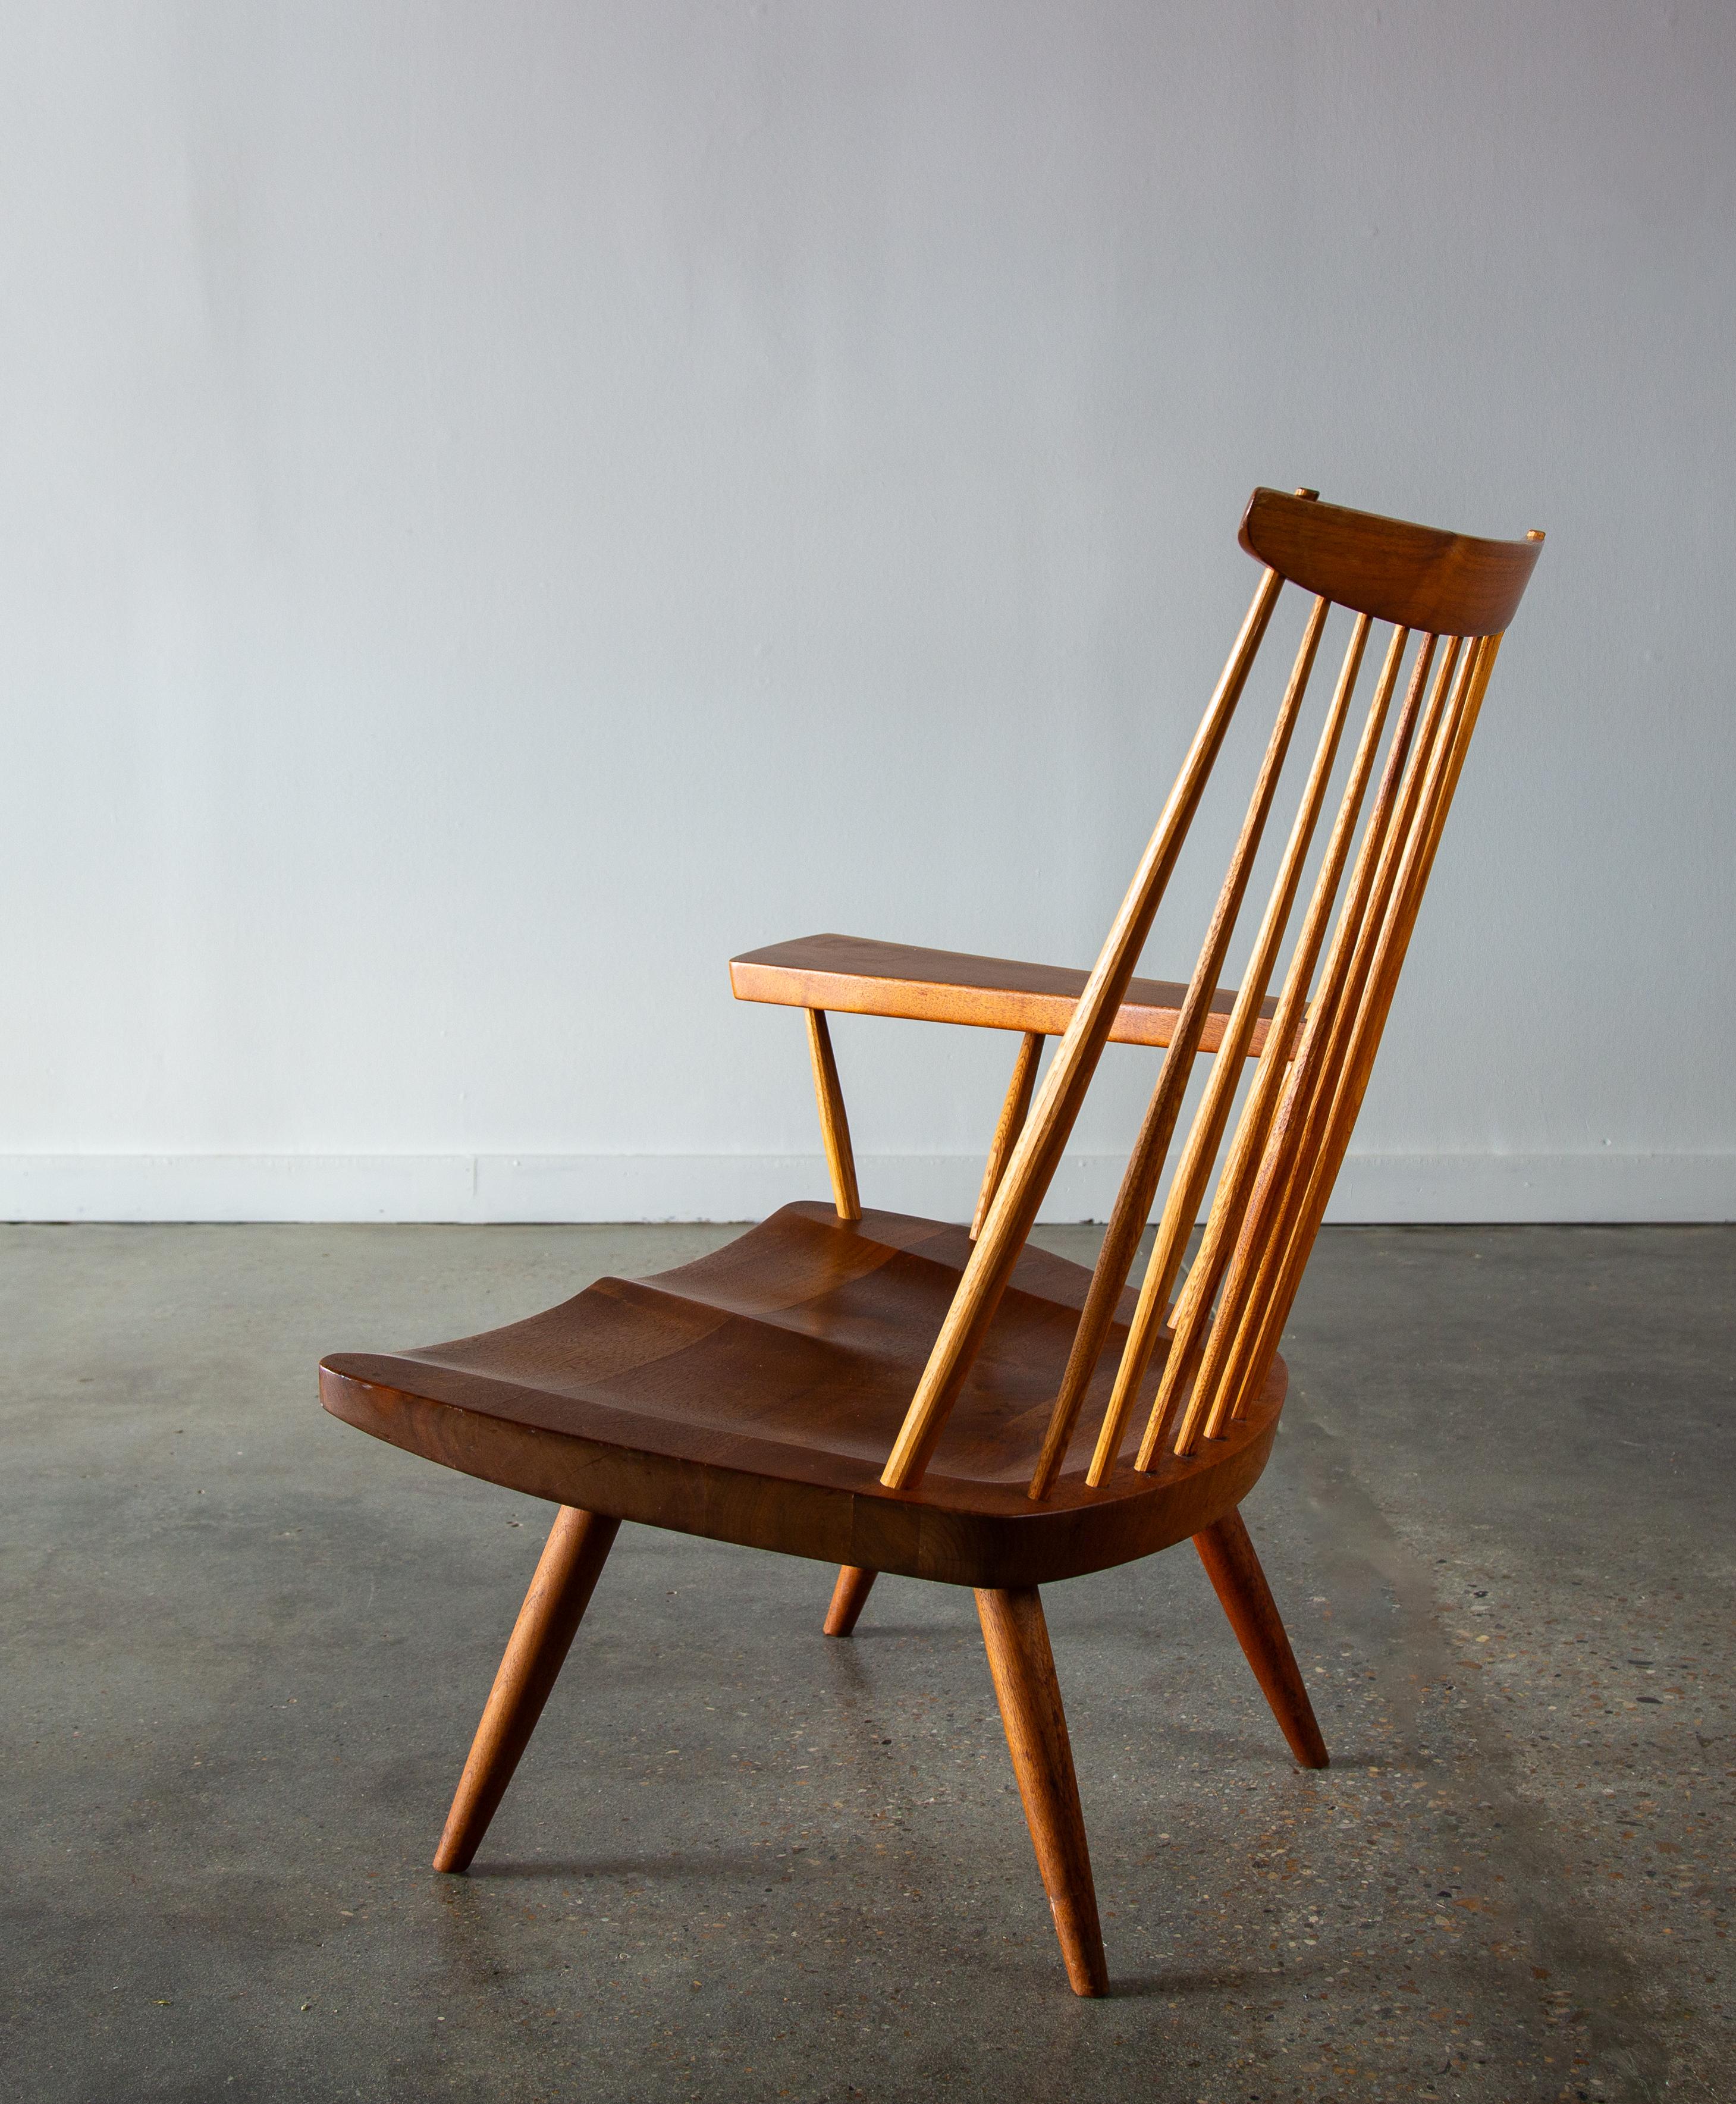 1975 George Nakashima Studio Lounge Chair with Free Form Arm Walnut and Hickory In Good Condition For Sale In Virginia Beach, VA